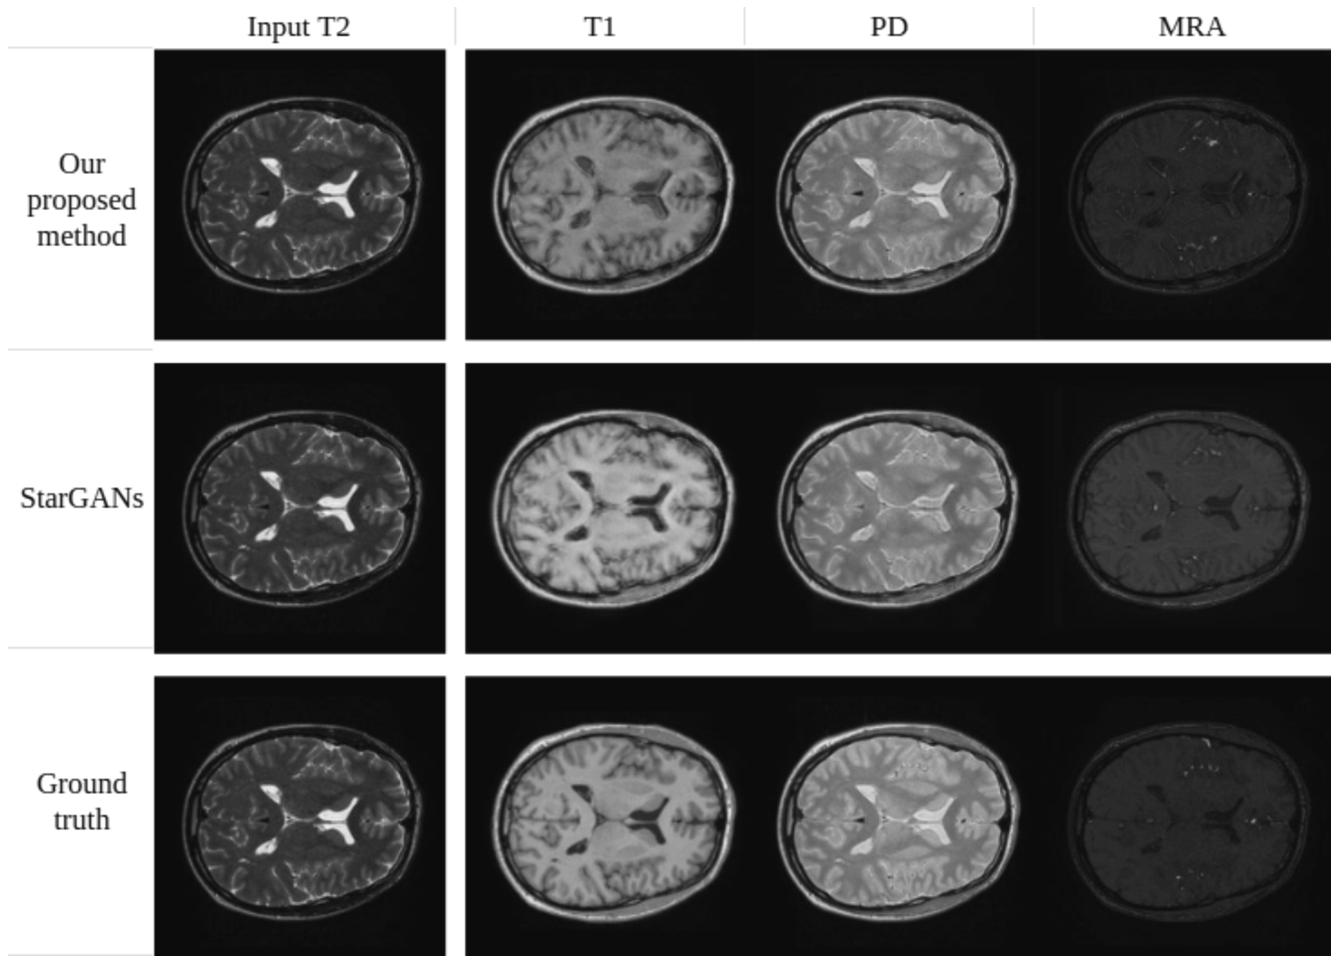 Synthesis of MRA, PD-weighted and T1-weighted images using a single T2-weighted image as input (IXI dataset).